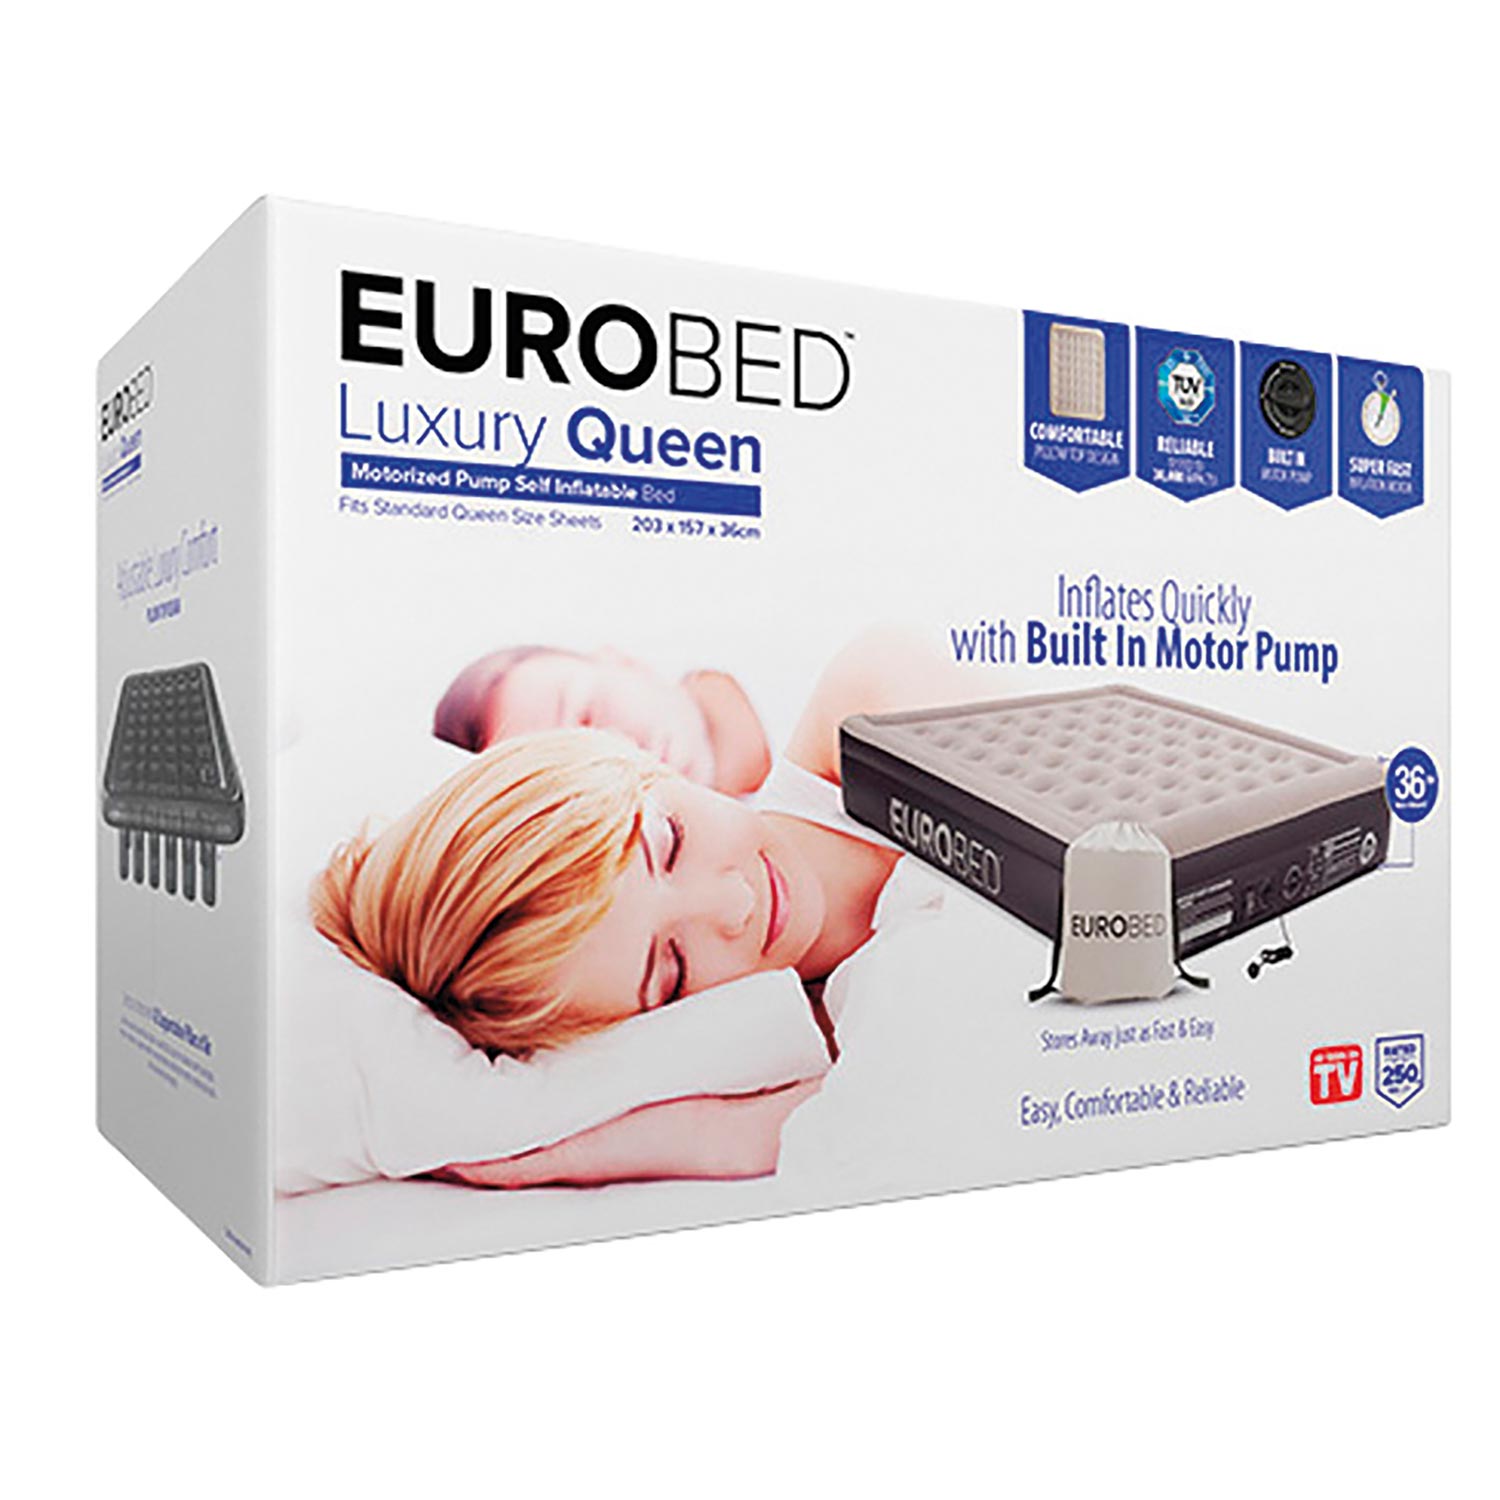 EUROBED LUXURY QUEEN AS SEEN ON TV WITH PUMP-Free Postage-Genuine Original